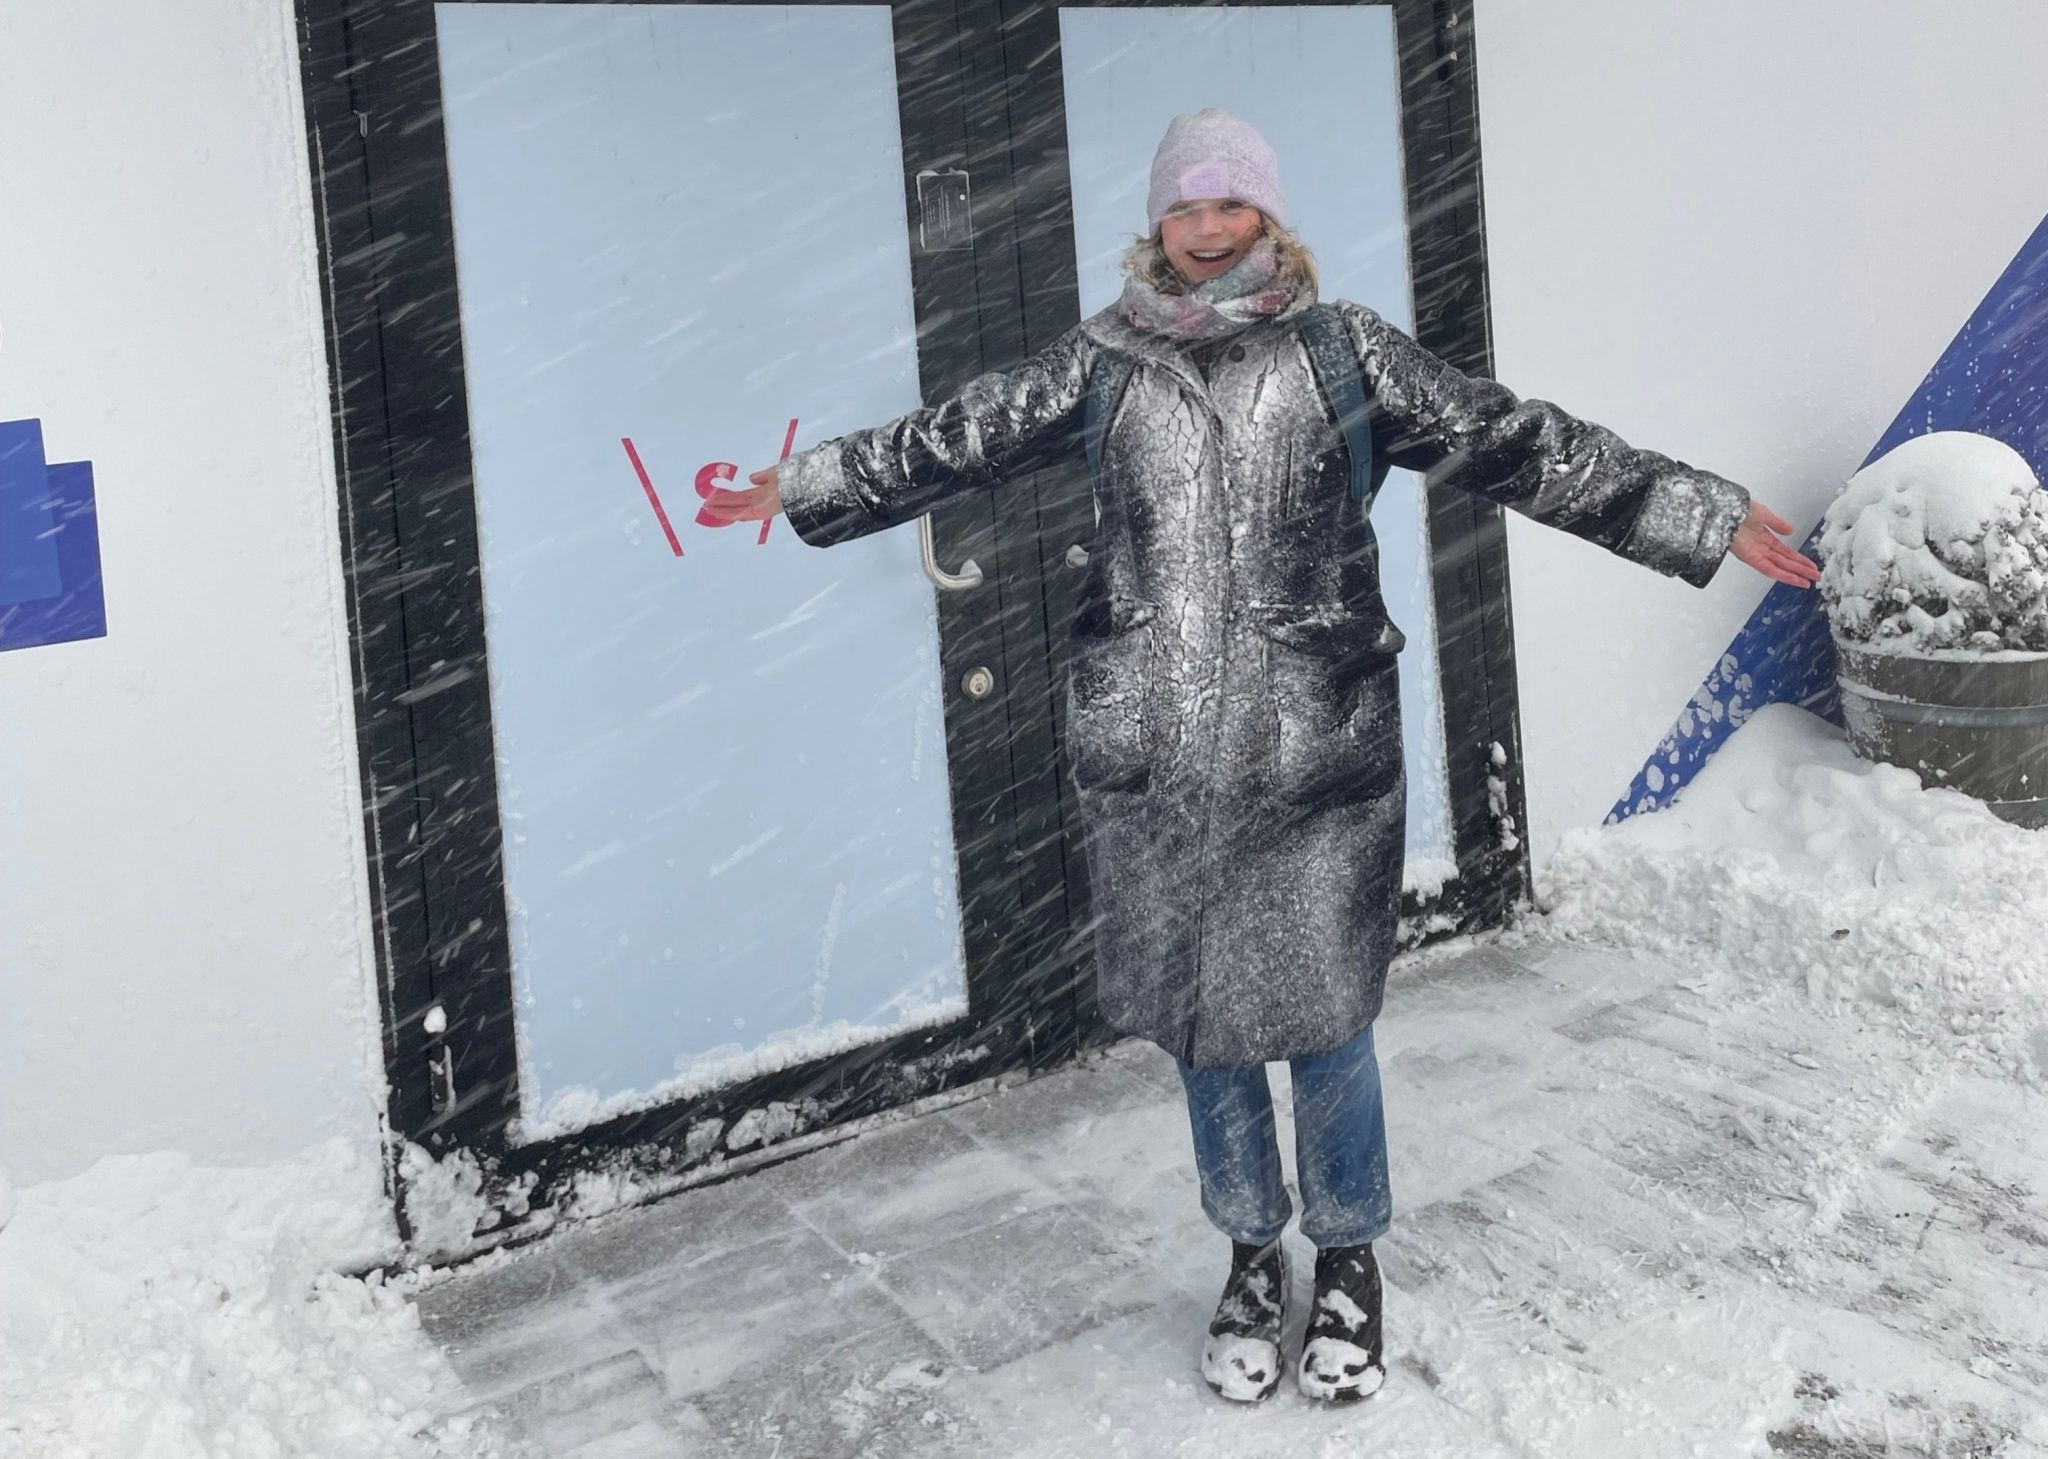 Let it snow: Amy Lewin, editor, Sifted